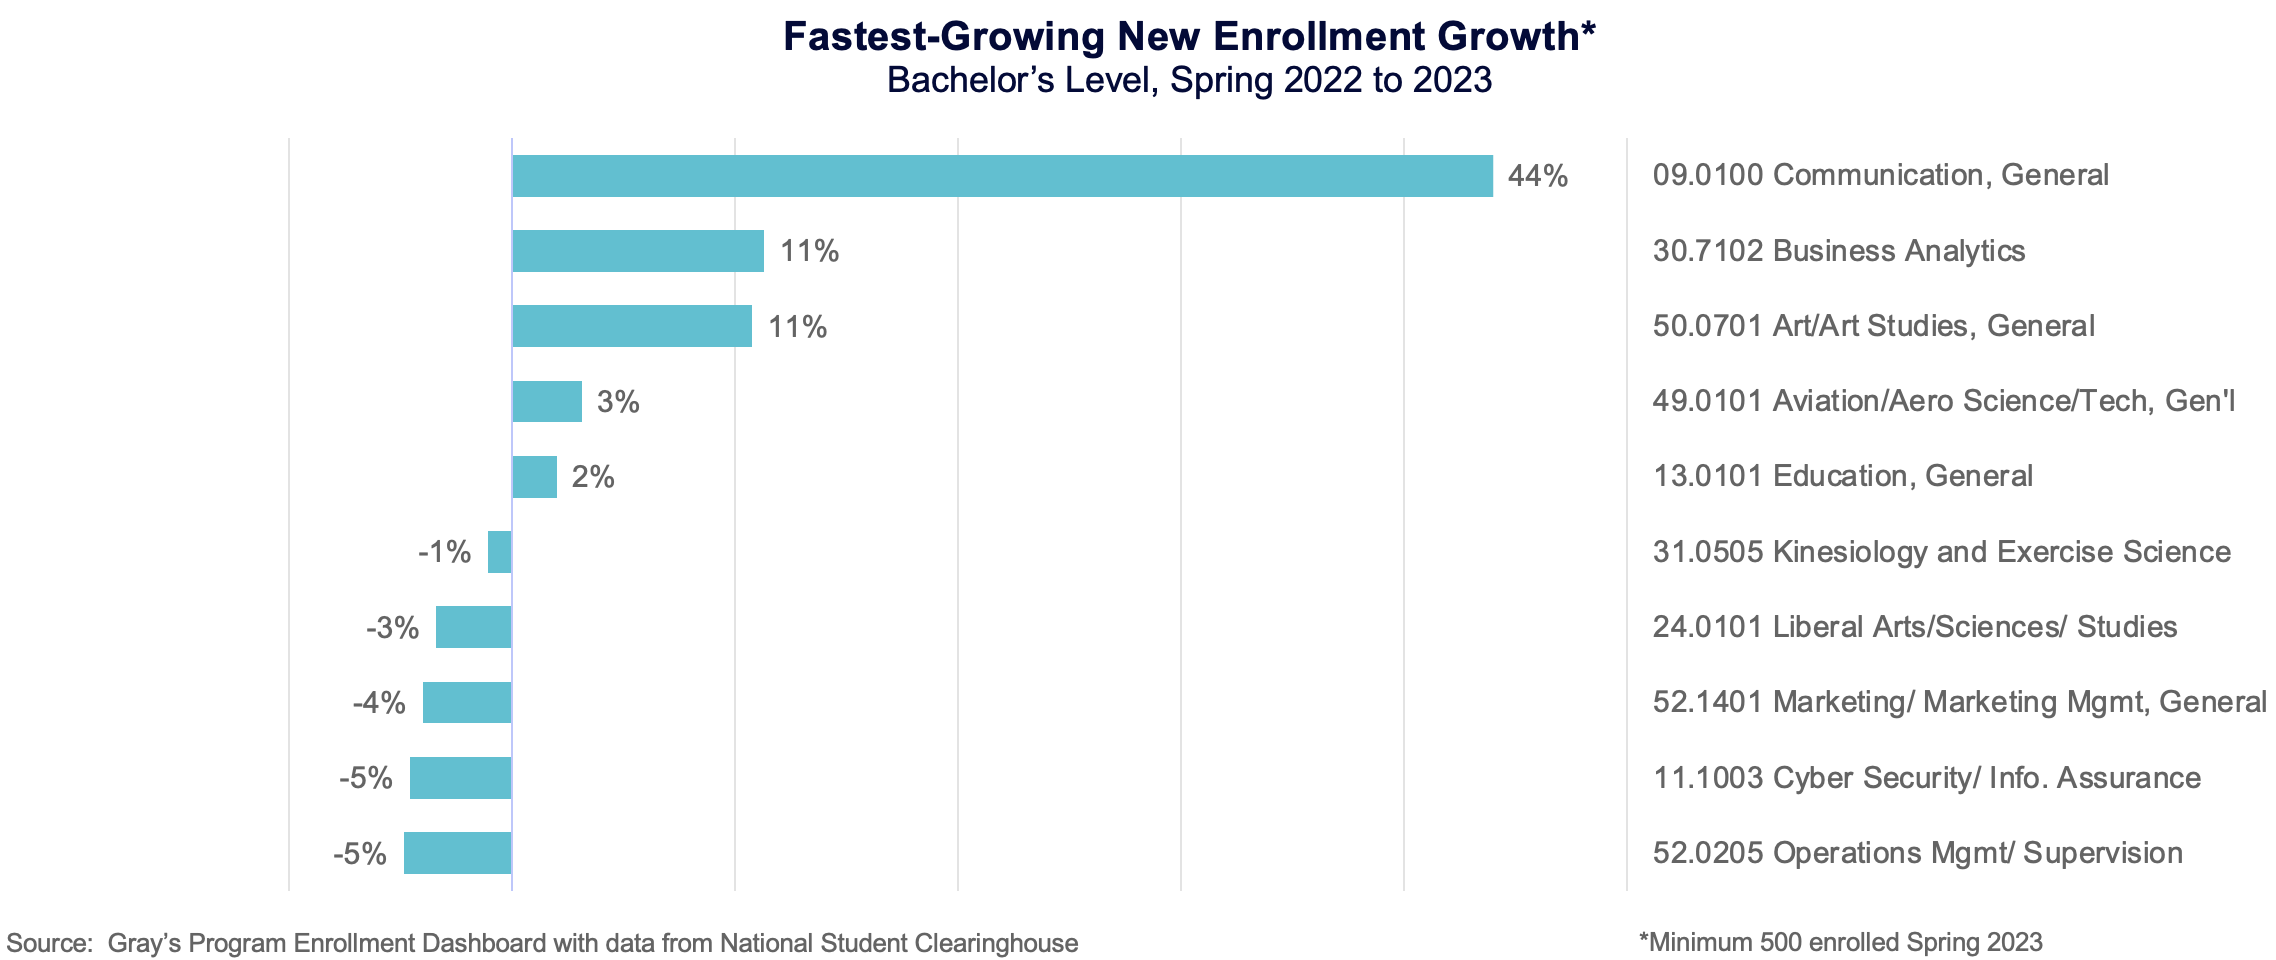 Fastest-Growing New Enrollment Growth* (Bachelor's level, Spring 2022 to 2023)